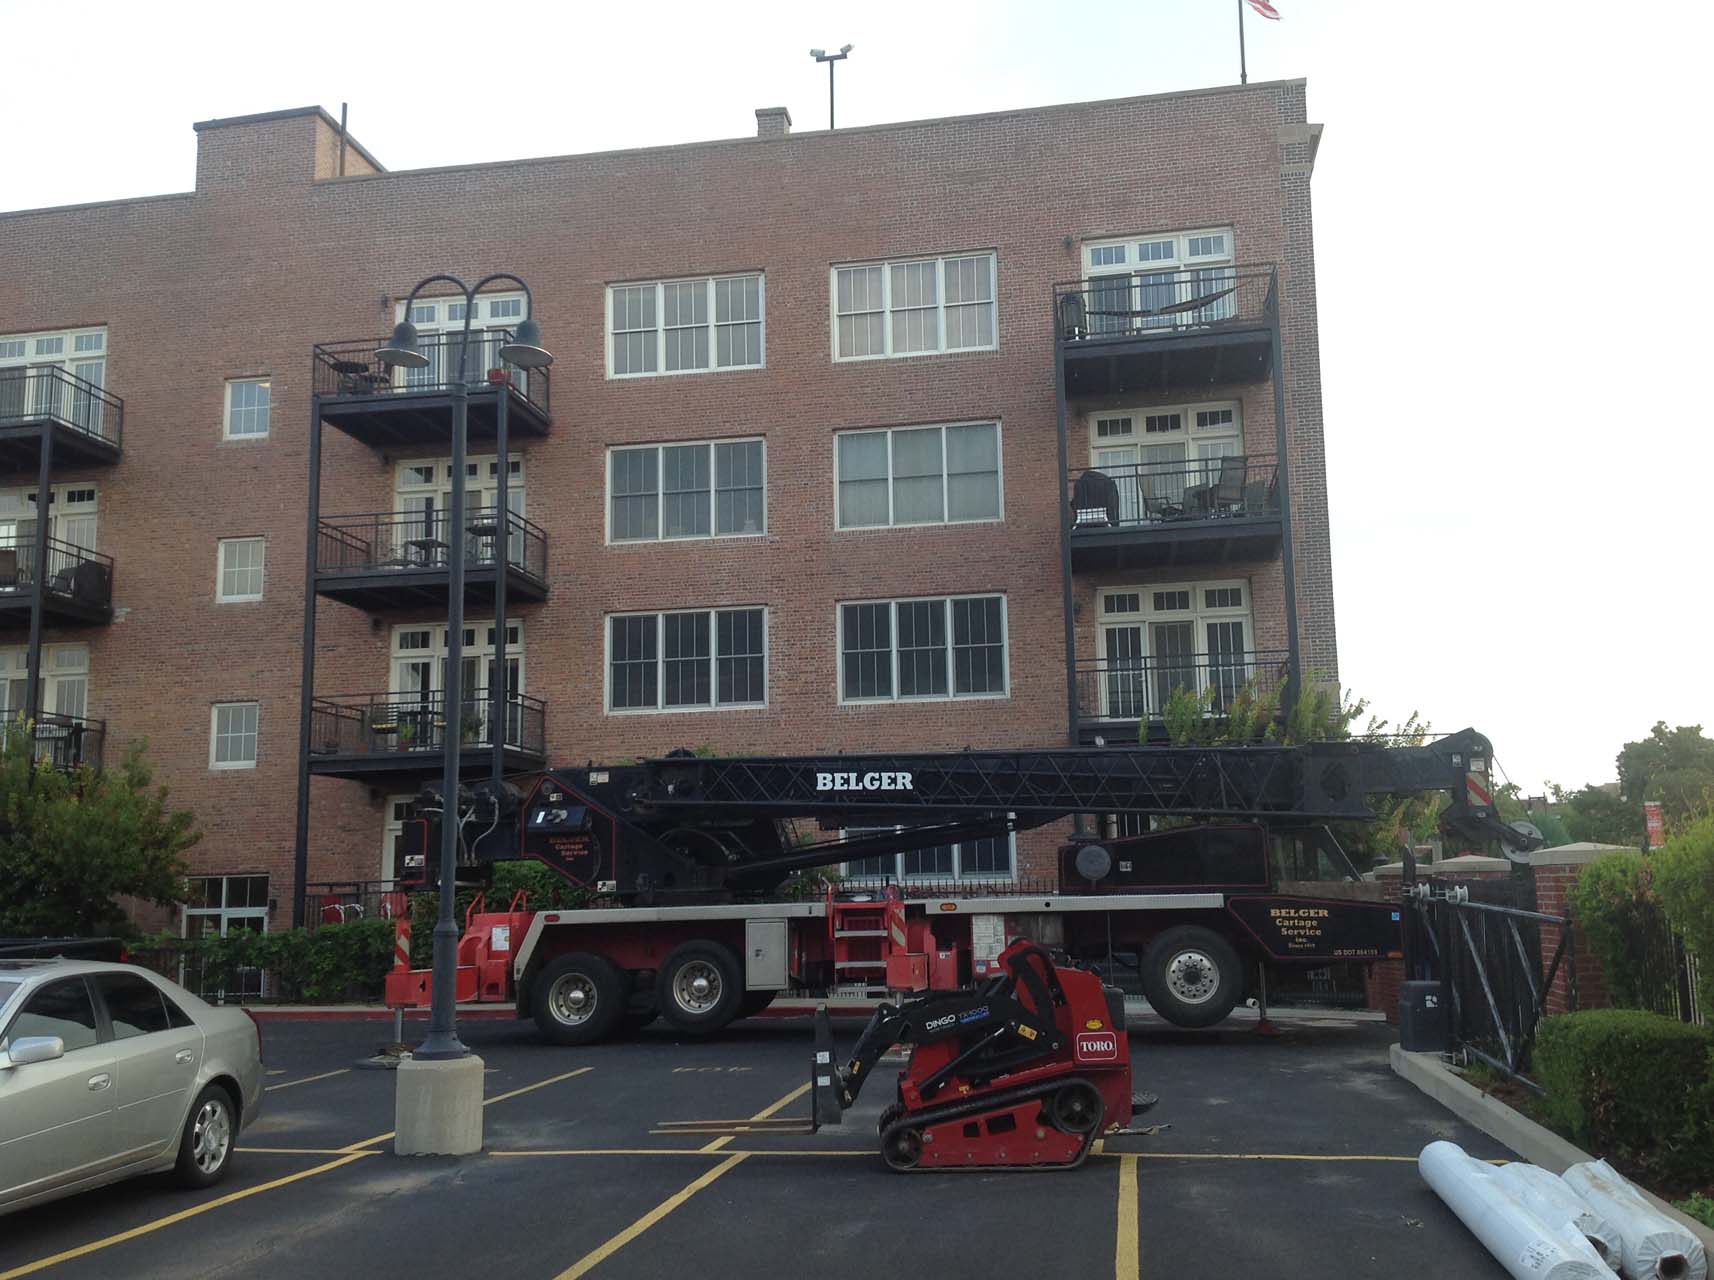 A crane truck is parked in front of a multi-unit apartment